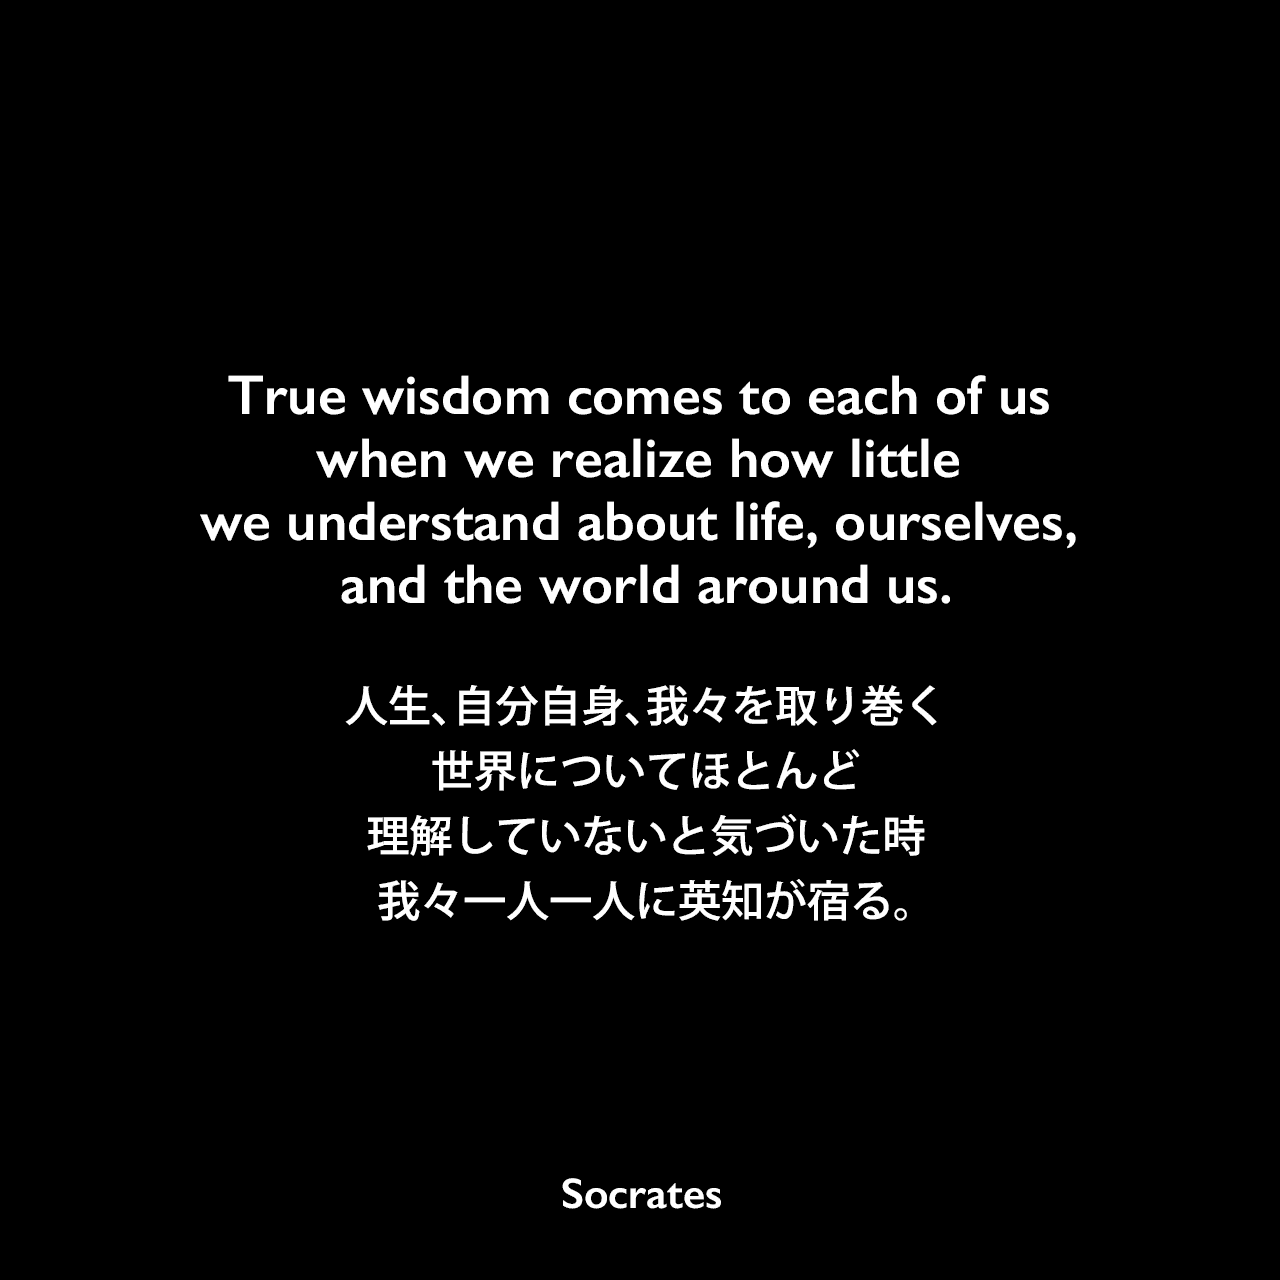 True wisdom comes to each of us when we realize how little we understand about life, ourselves, and the world around us.人生、自分自身、我々を取り巻く世界についてほとんど理解していないと気づいた時、我々一人一人に英知が宿る。Socrates